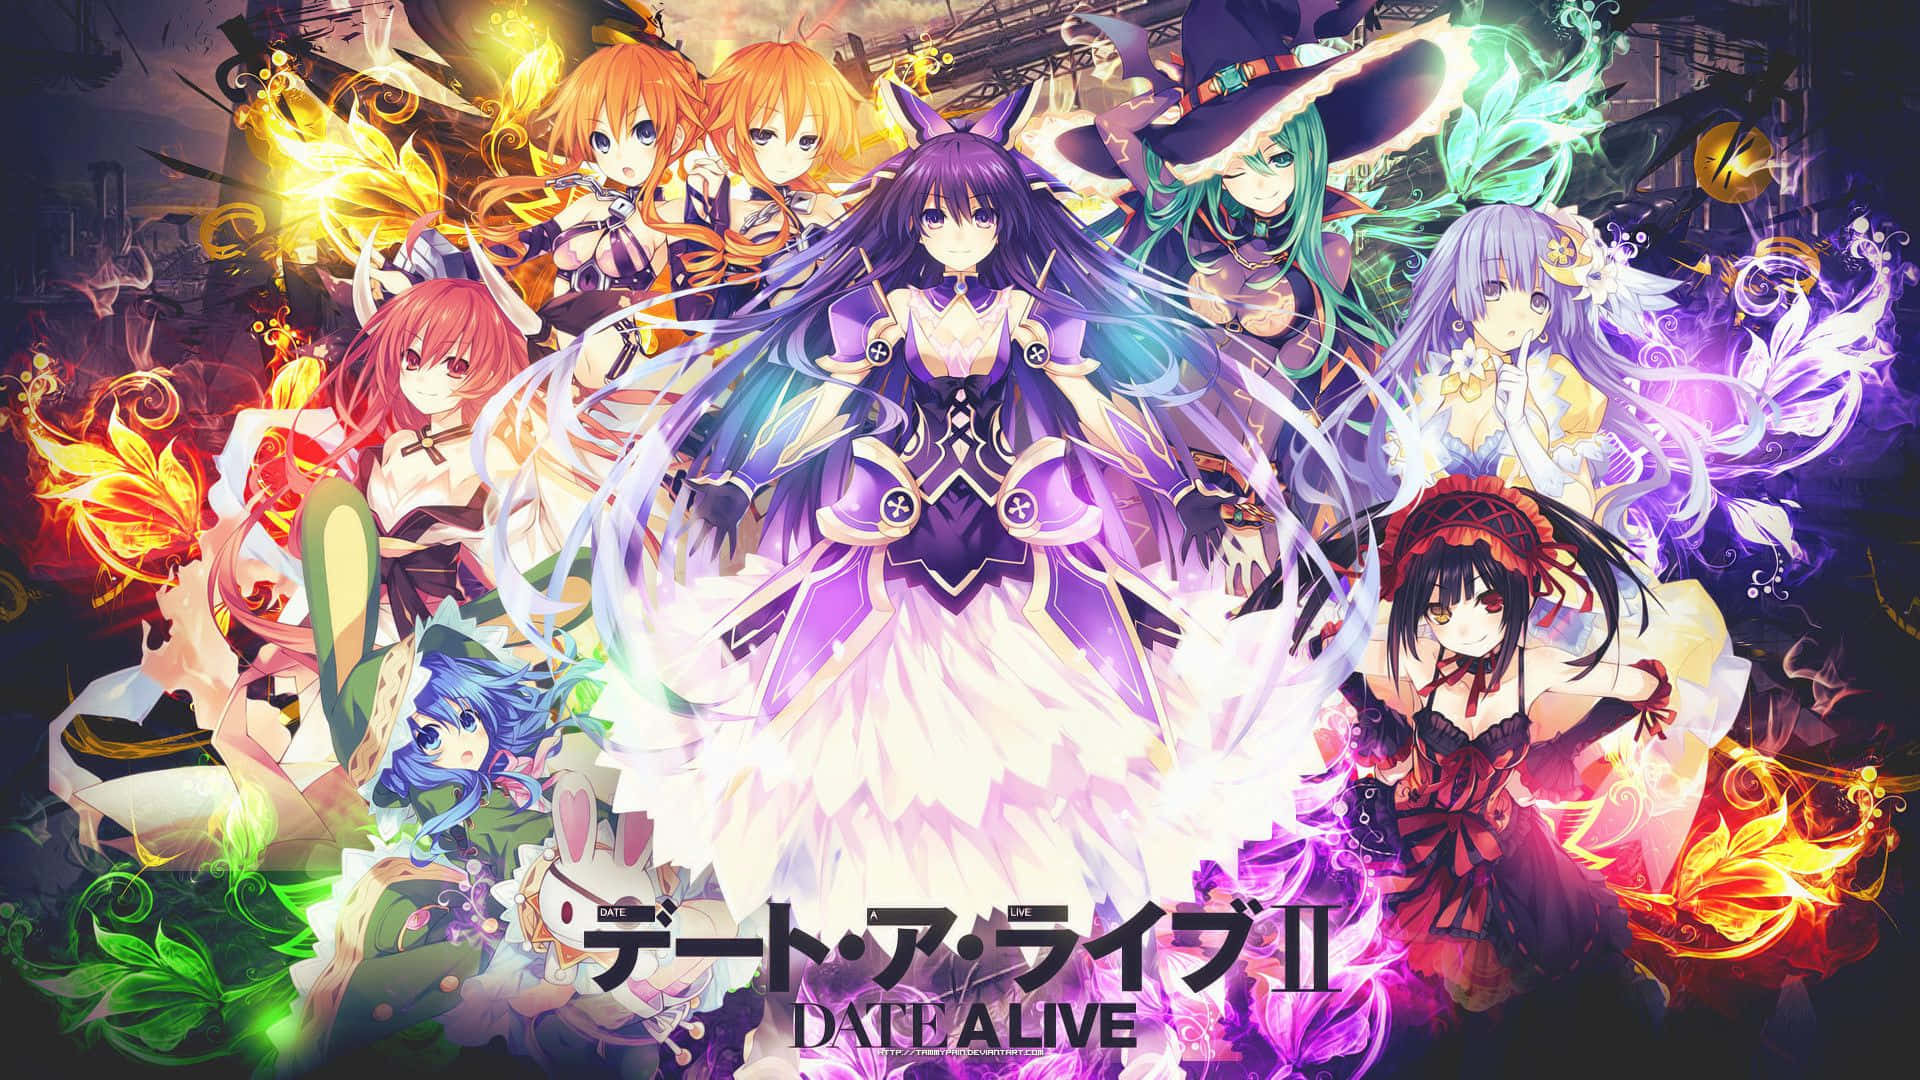 Celebrate with the whole Date A Live cast! Wallpaper